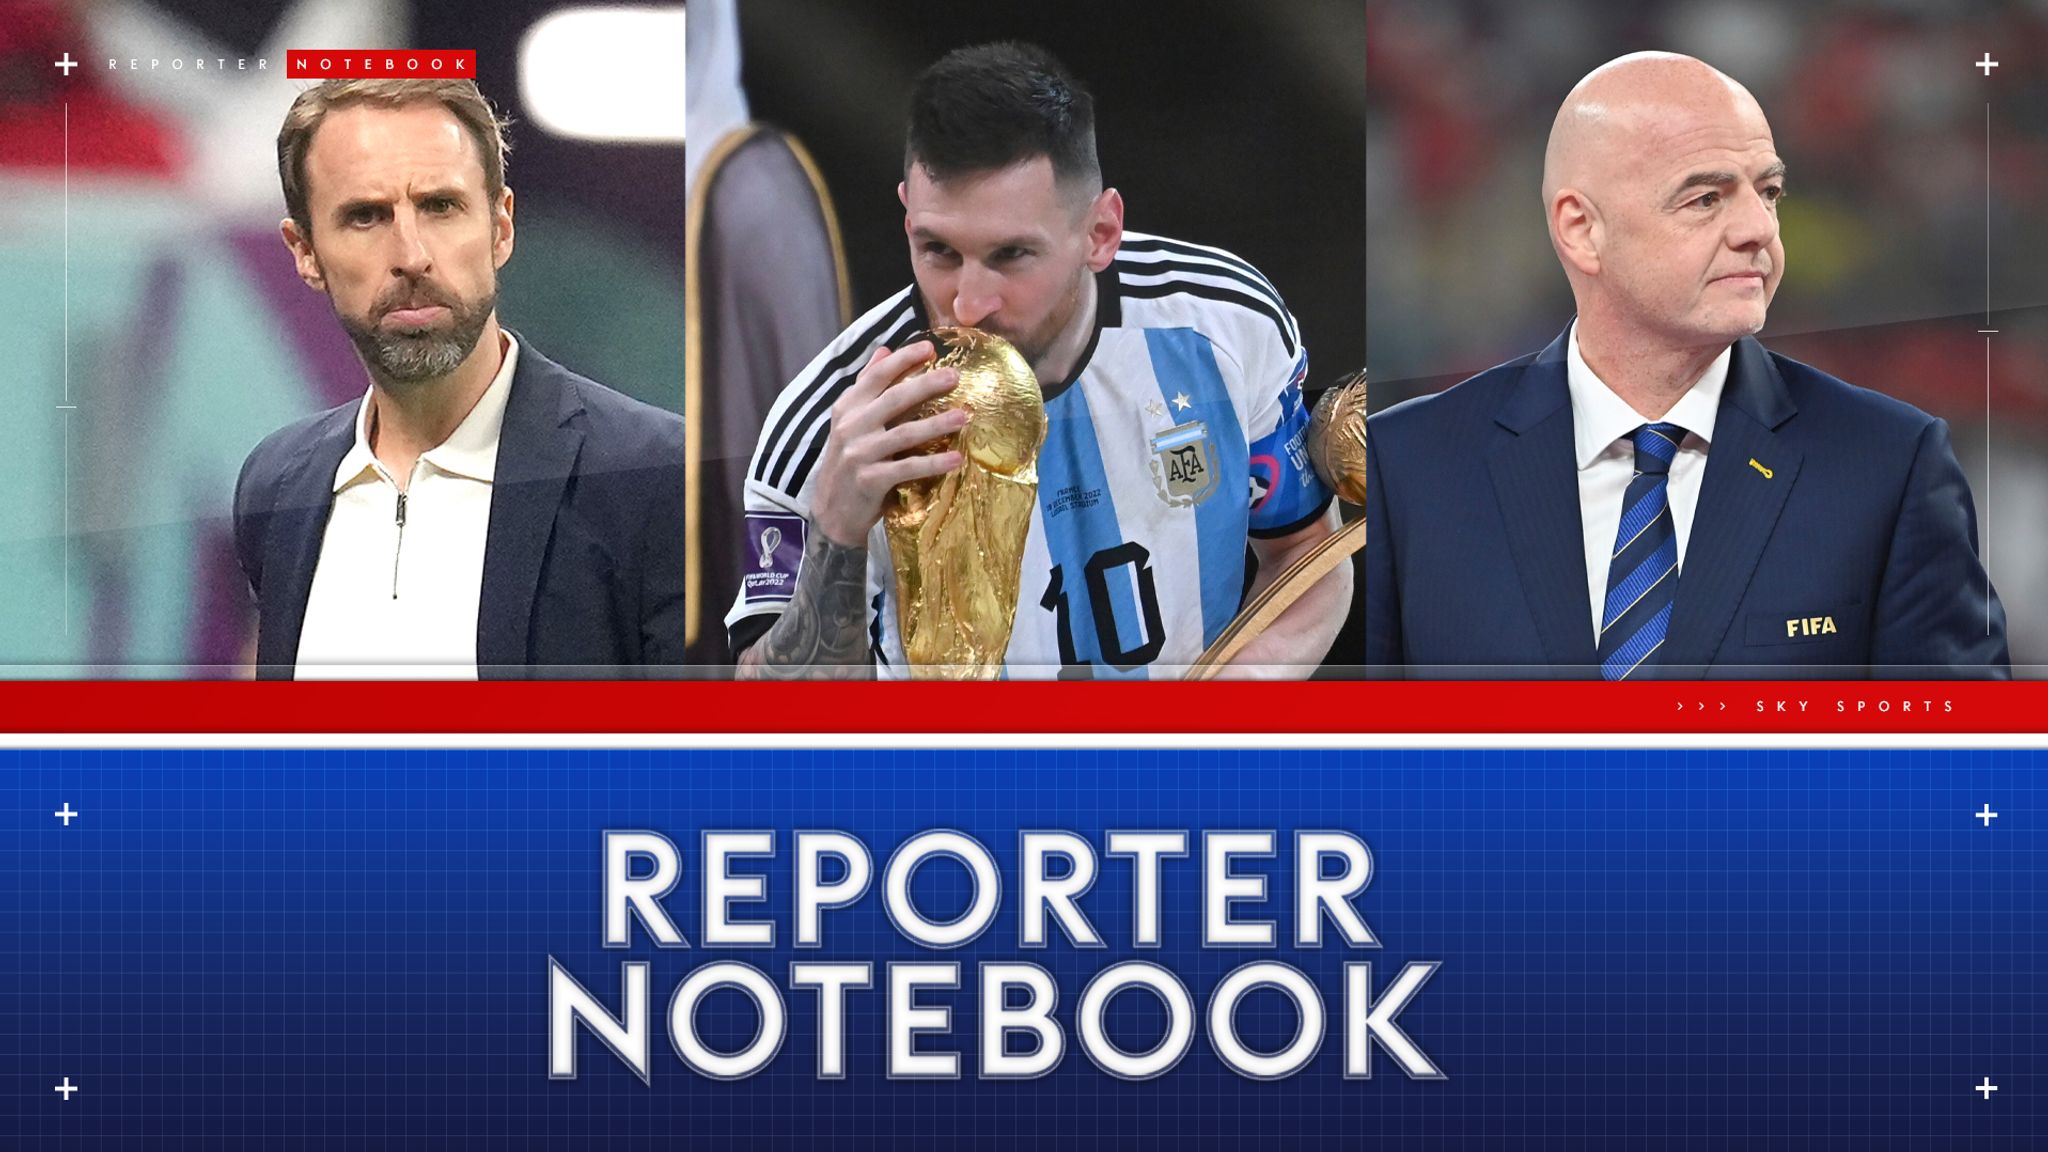 World Cup 2022 review Lionel Messis football fairytale ends a controversial tournament in Qatar Football News Sky Sports